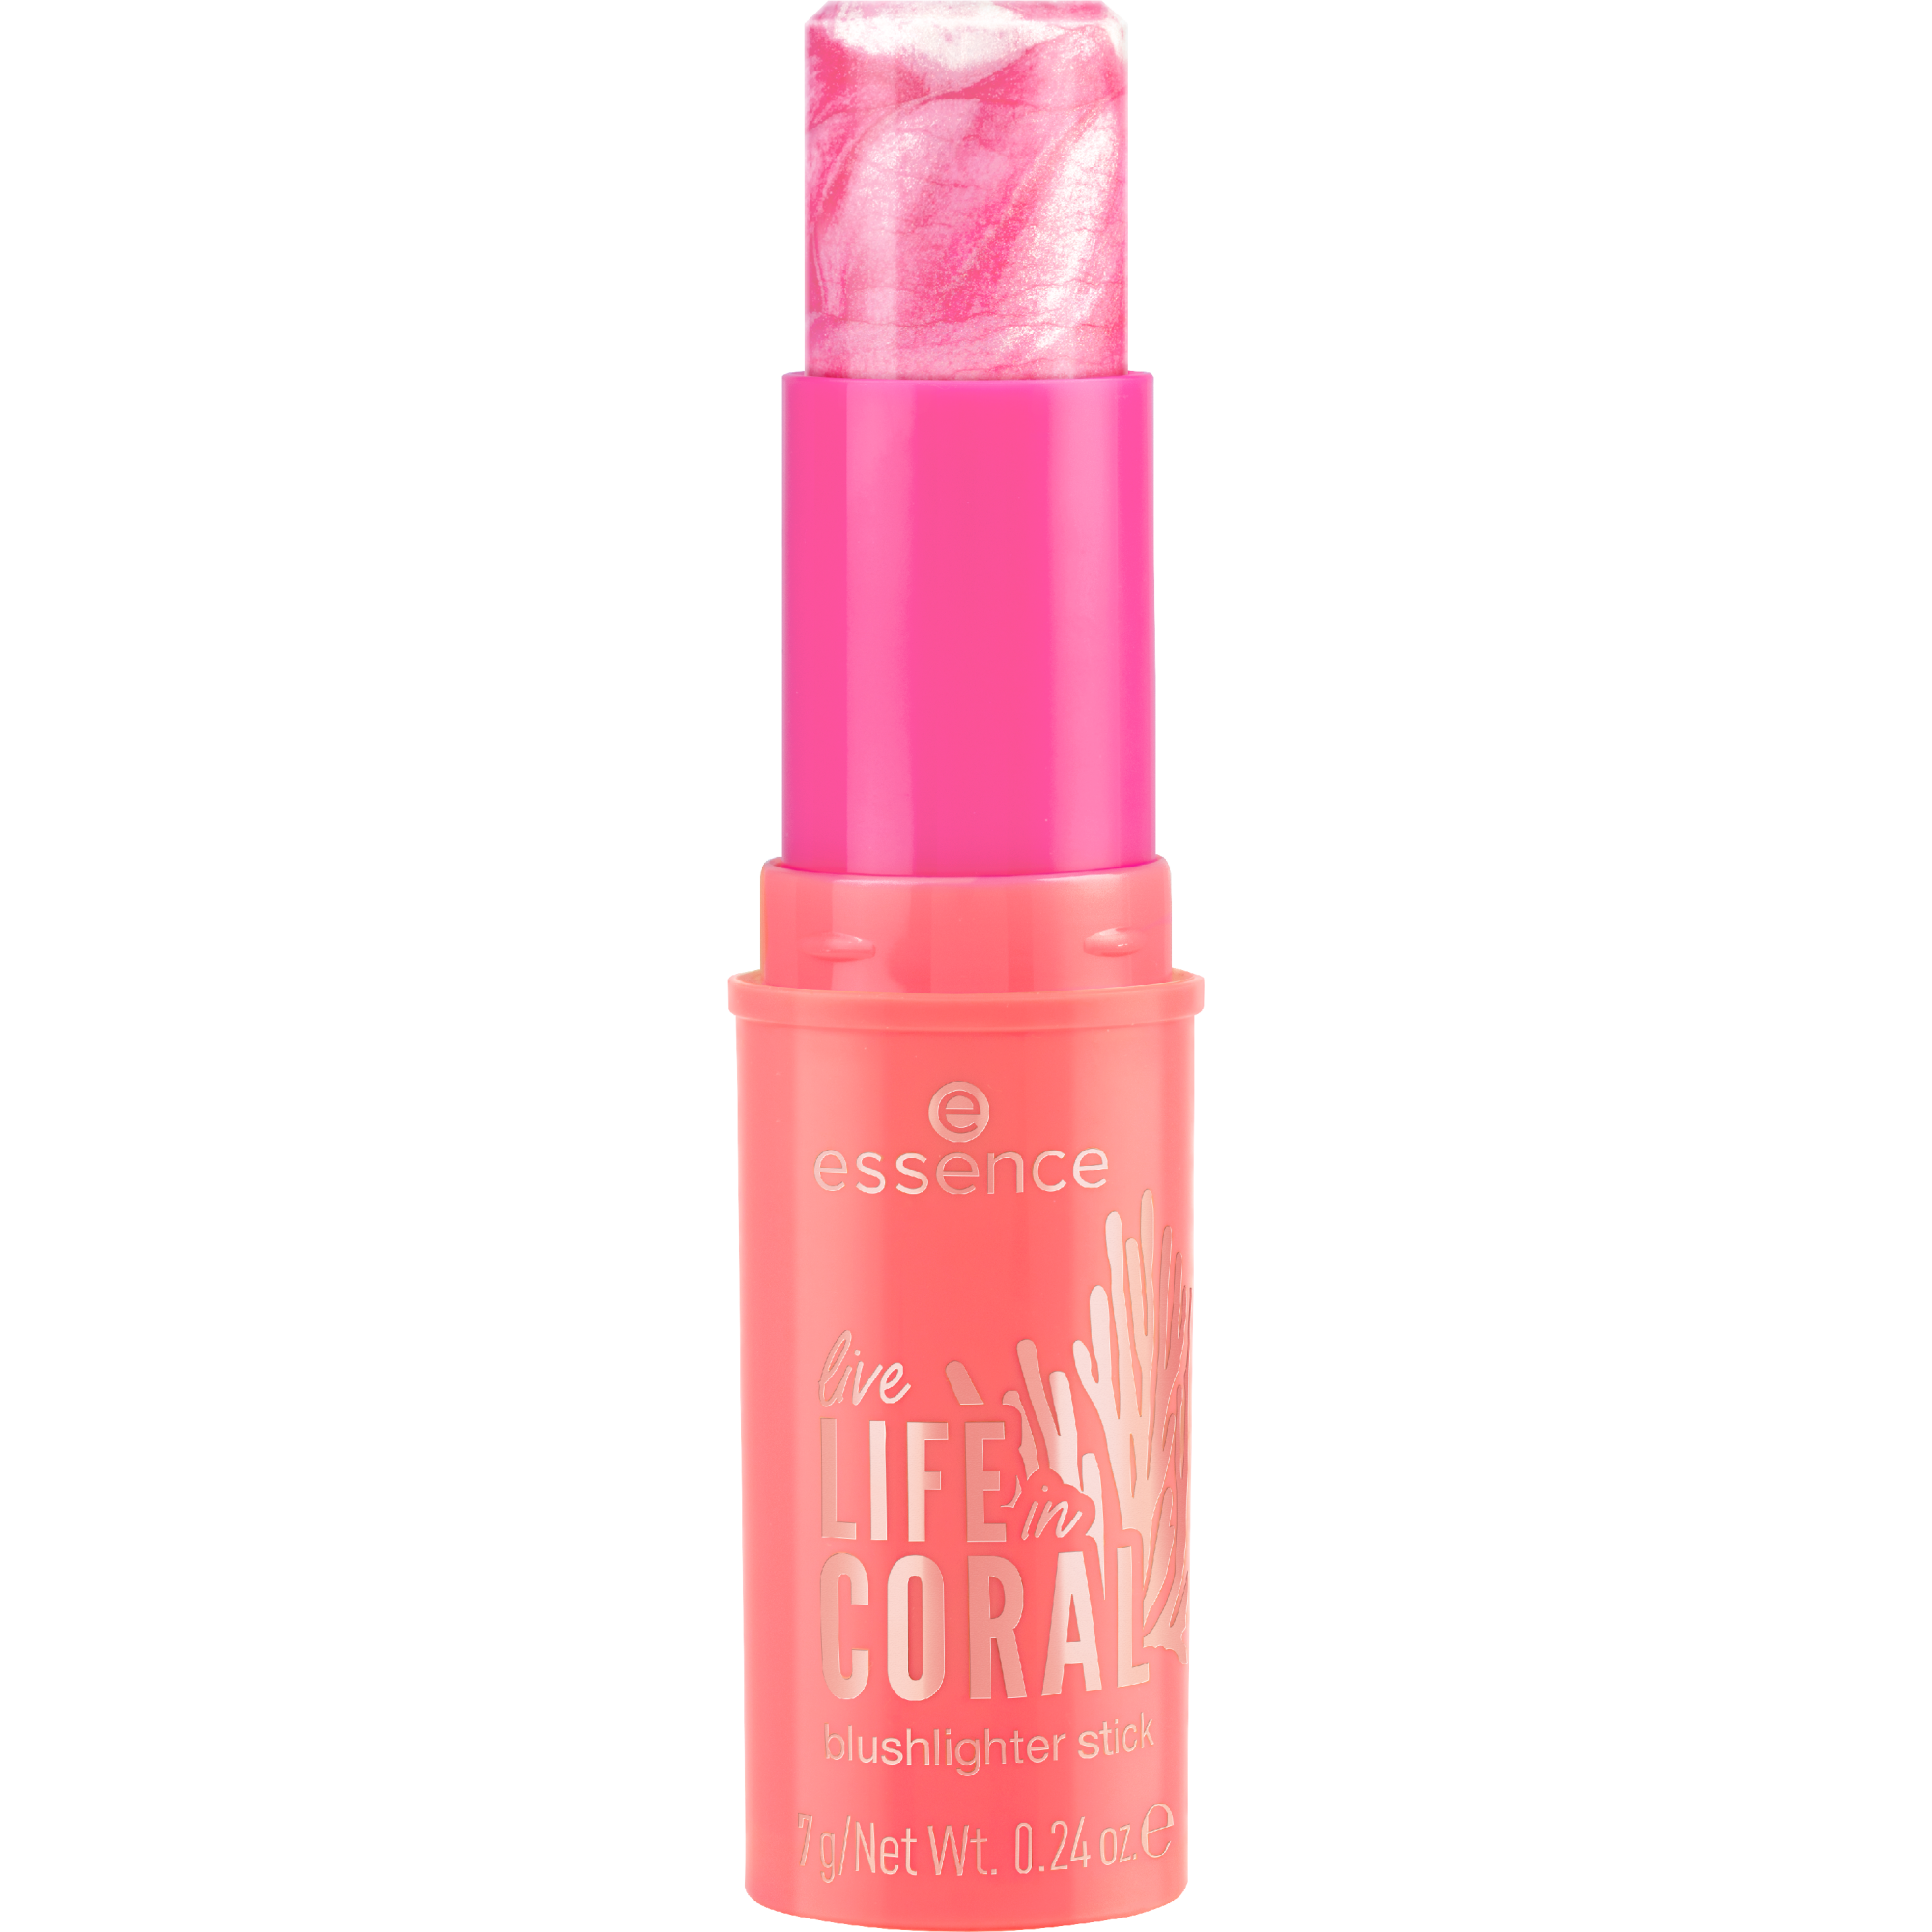 live LIFE in CORAL blushlighter stick